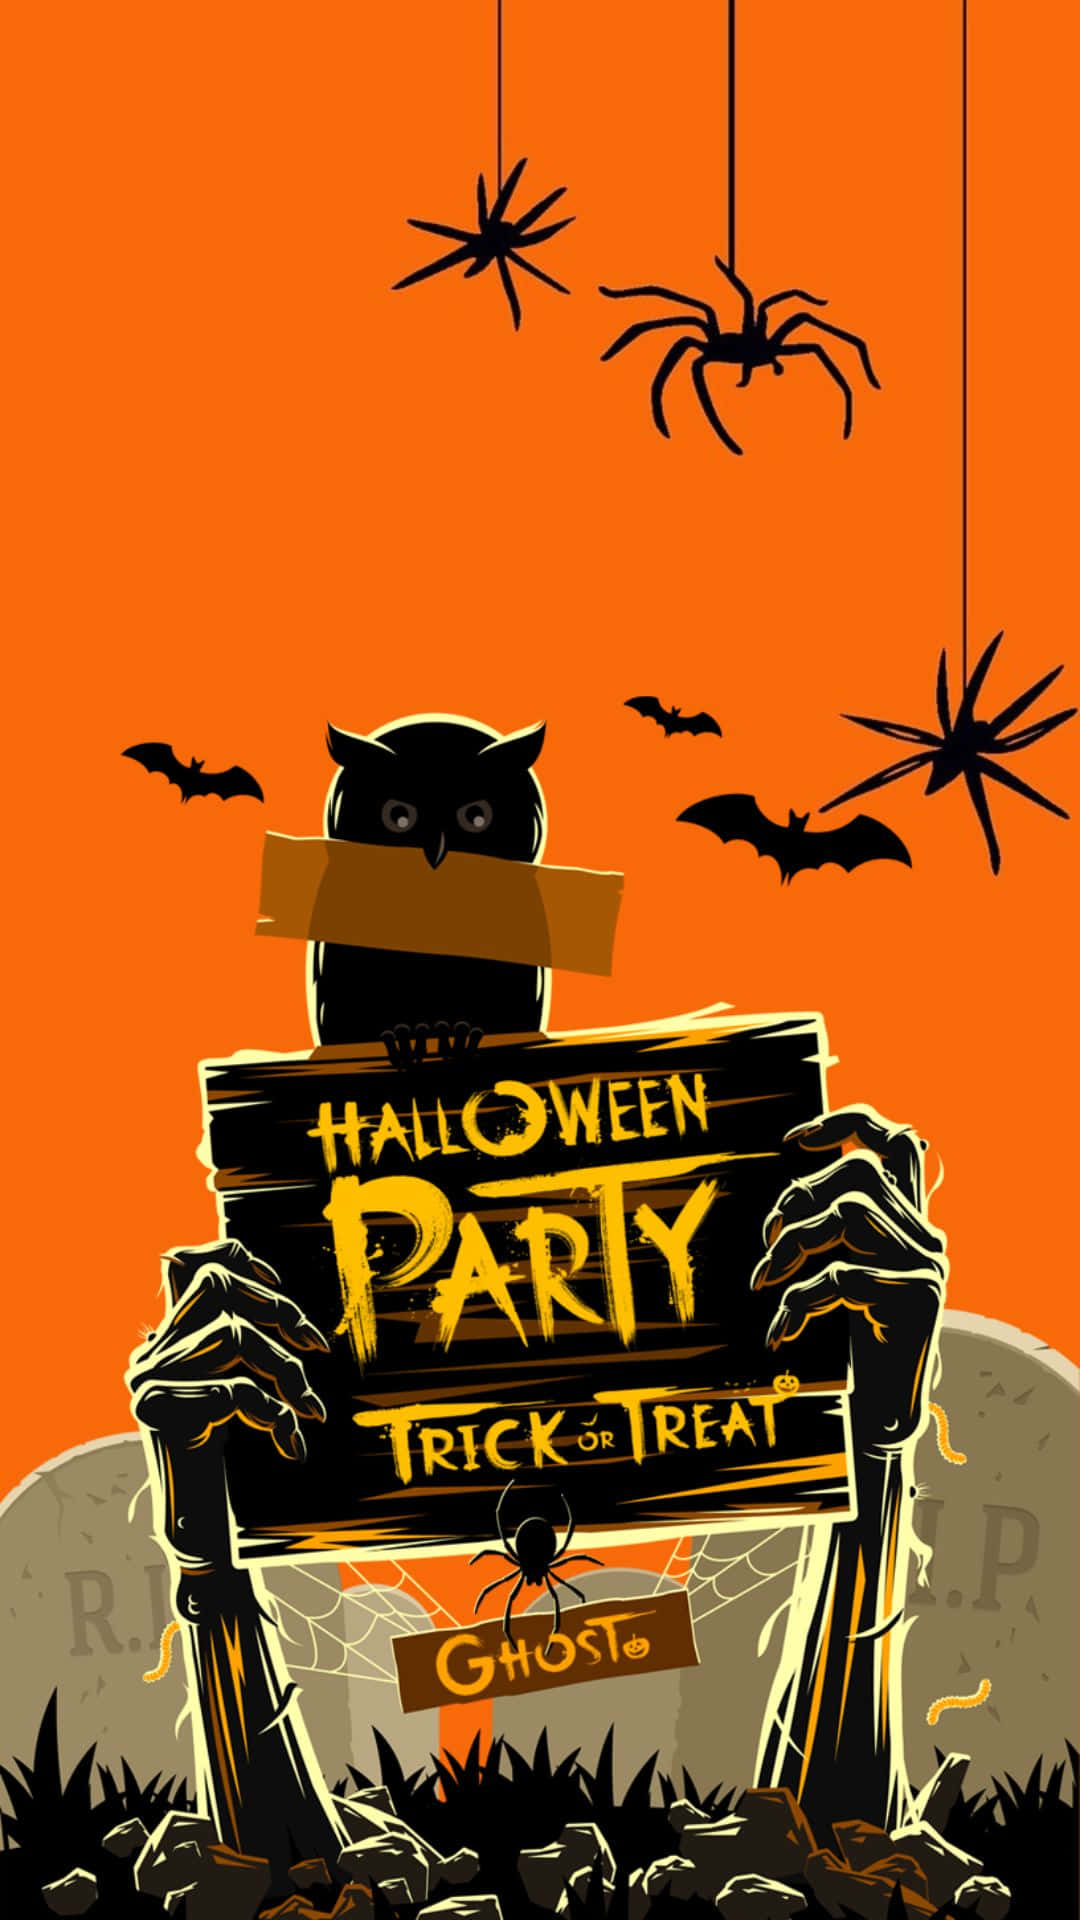 "From Tricks to Treats, Have a Spooky and Safe Halloween Party!"